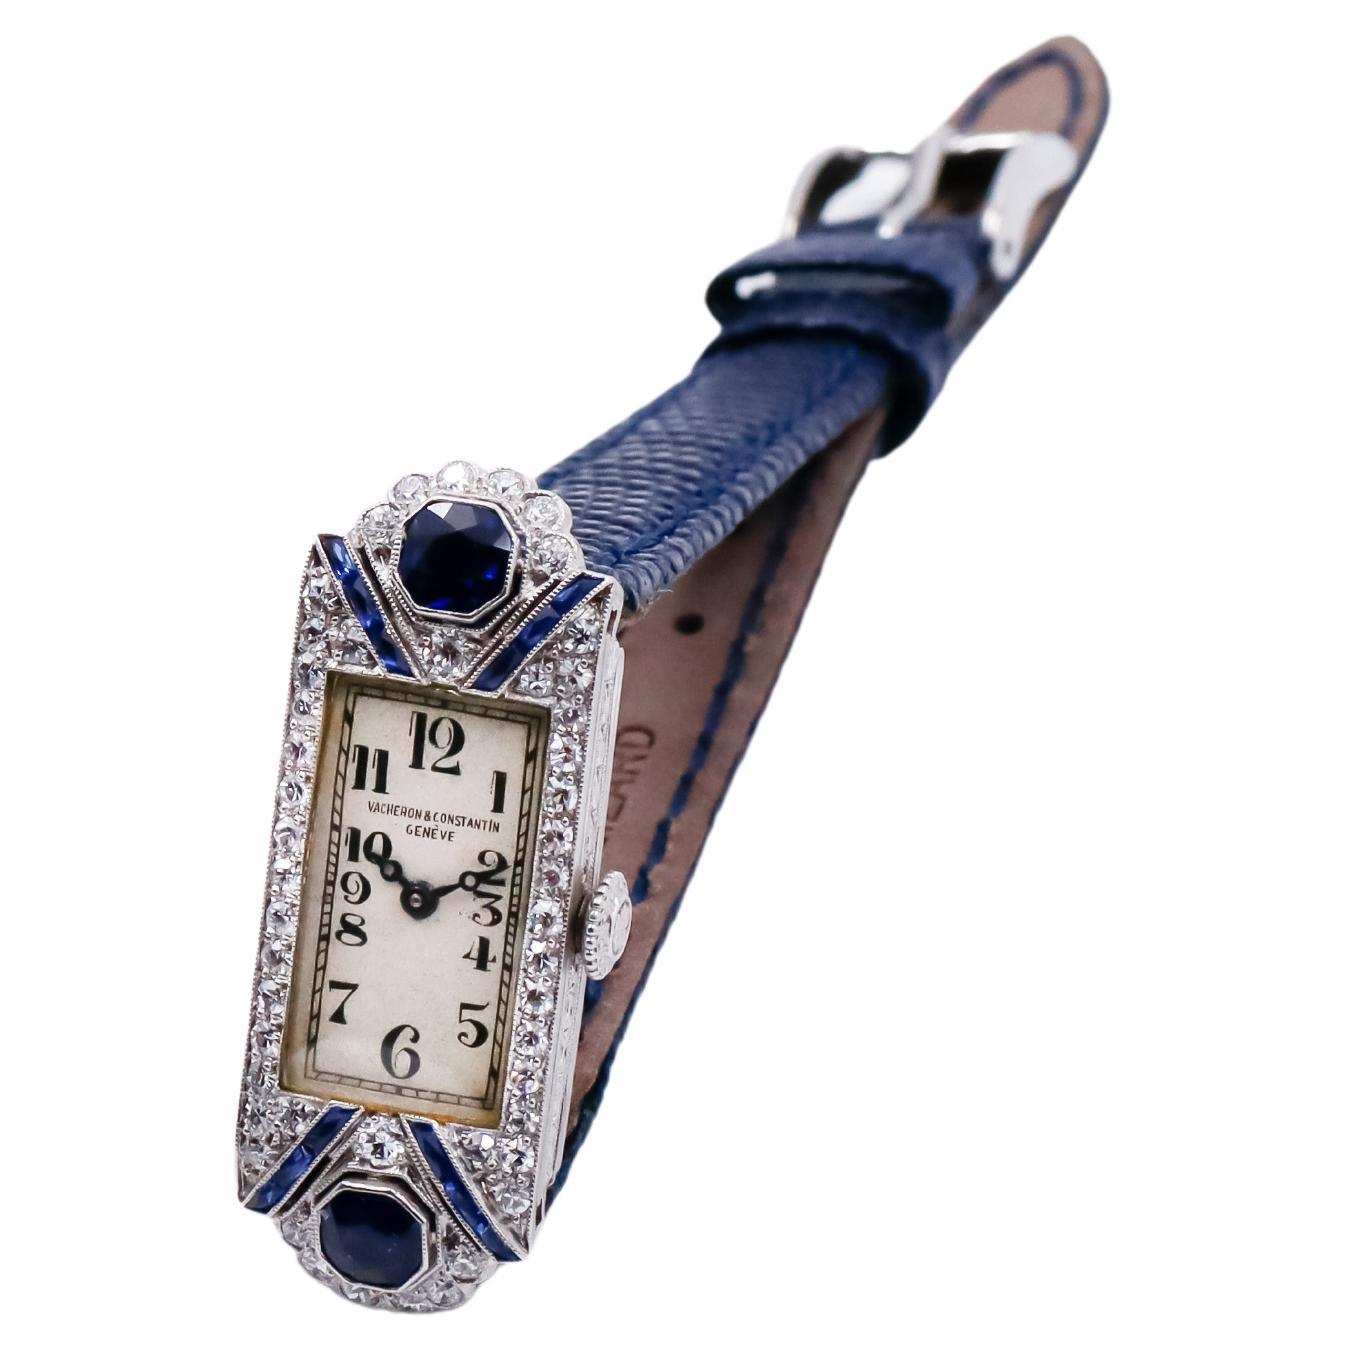 Vacheron Constantin Platinum and Diamond Dress Watch with Ceylon Sapphires, 1920 In Excellent Condition For Sale In Long Beach, CA